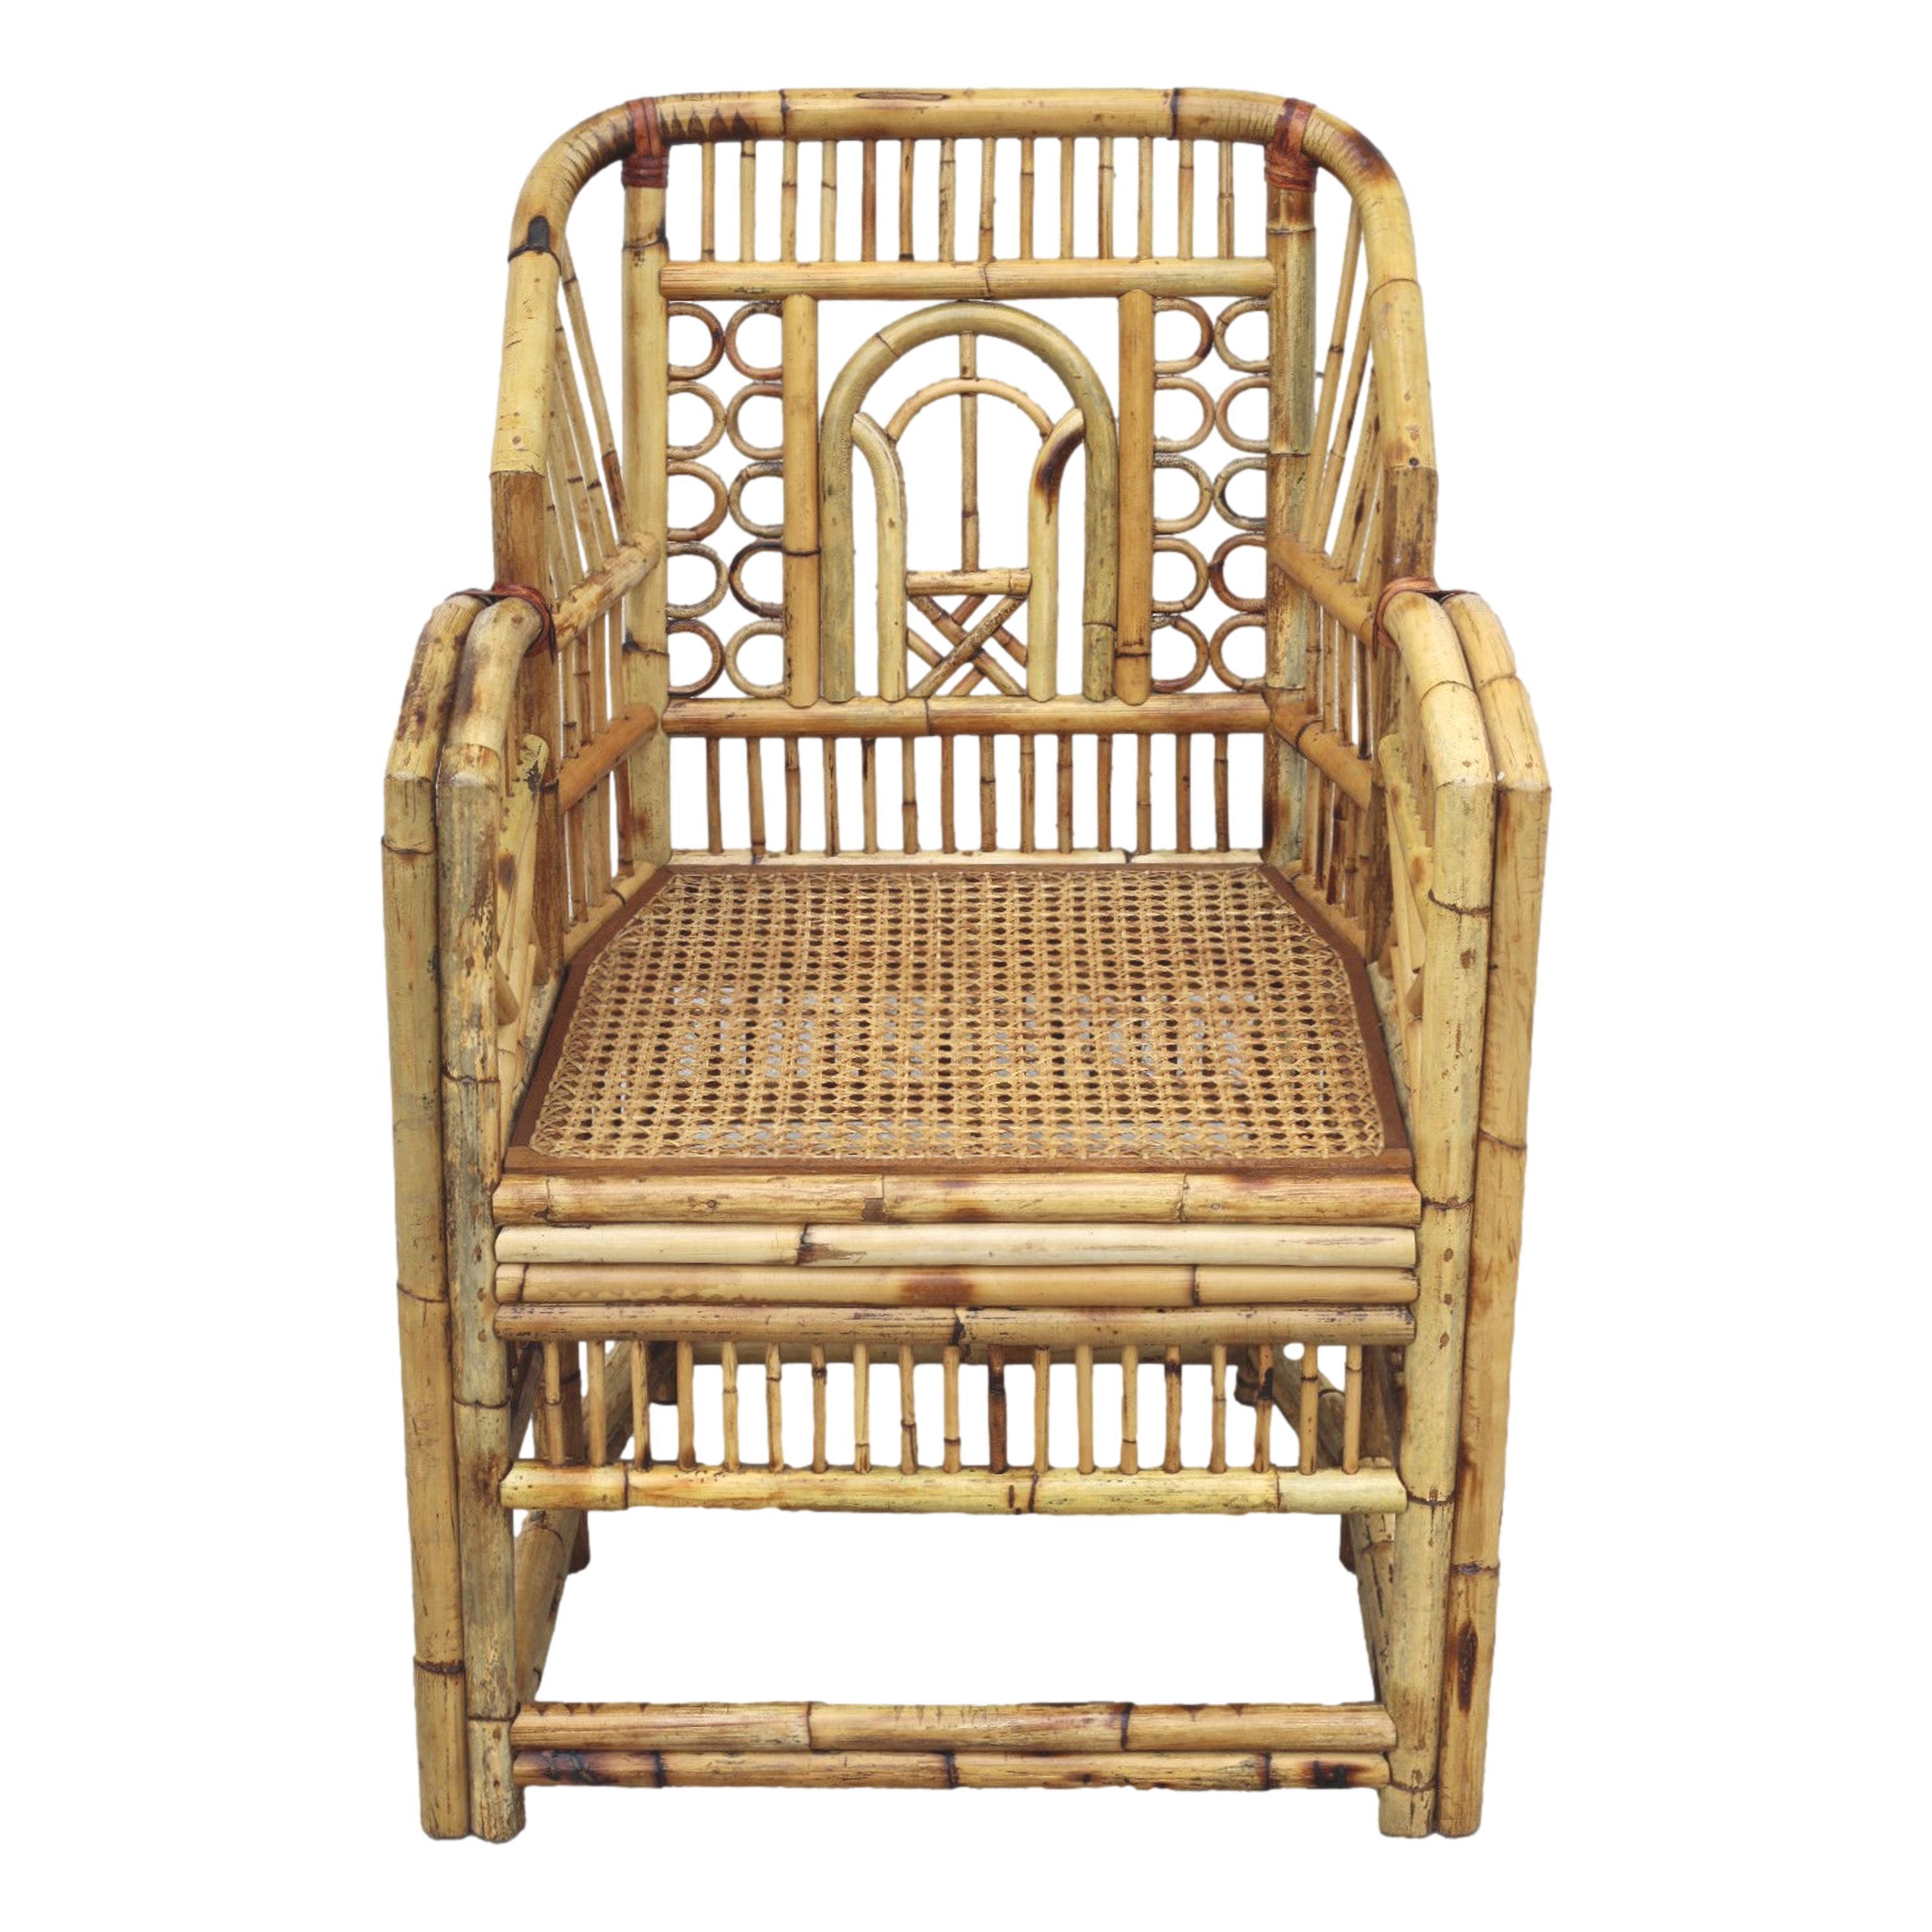 Brighton style bamboo dining arm chair, circa 1970.  This handcrafted Chinese Chippendale chair features a caned-bottom seat, bamboo open fretwork, and a burnt bamboo finish with a lovely distressed aged patina. Small loss of bamboo fretwork as